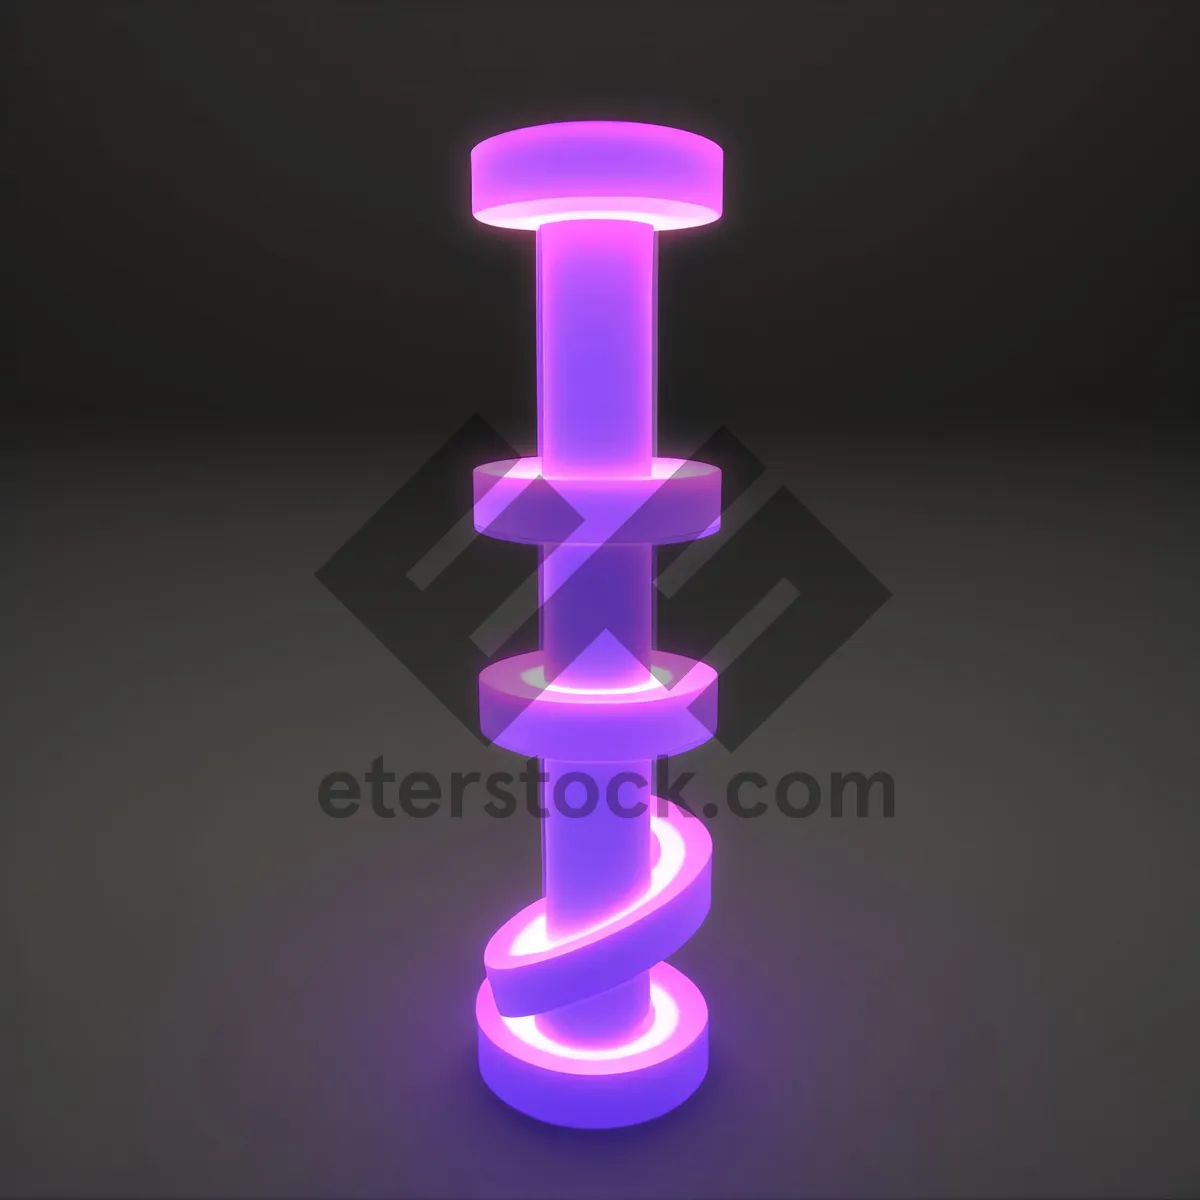 Picture of Vibrant 3D Thumbtack Render